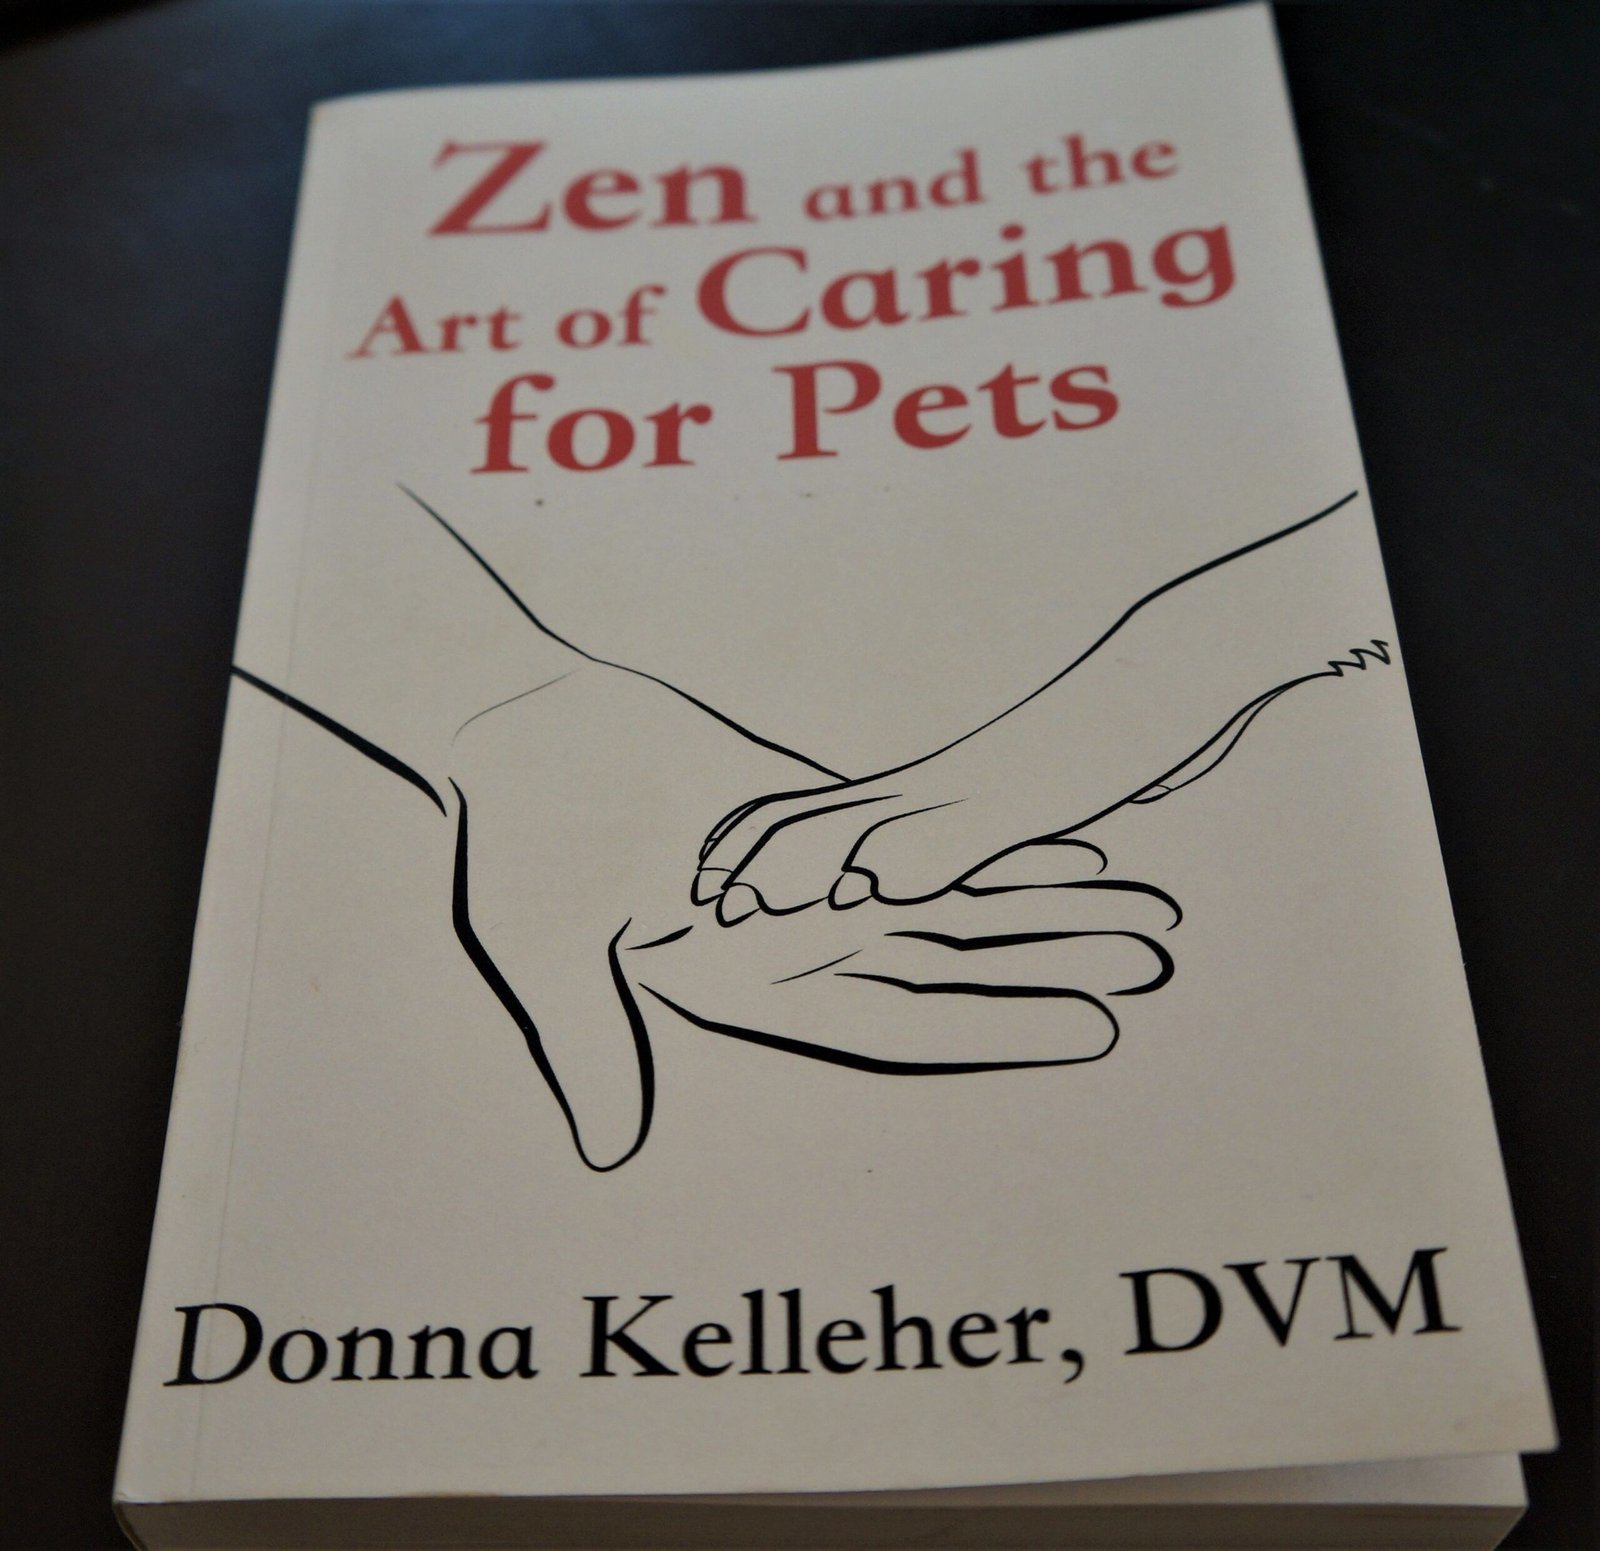 Zen and the art of caring for pets book cover - white paper with red test with black line drawing of a person's hand with a pet's paw in it